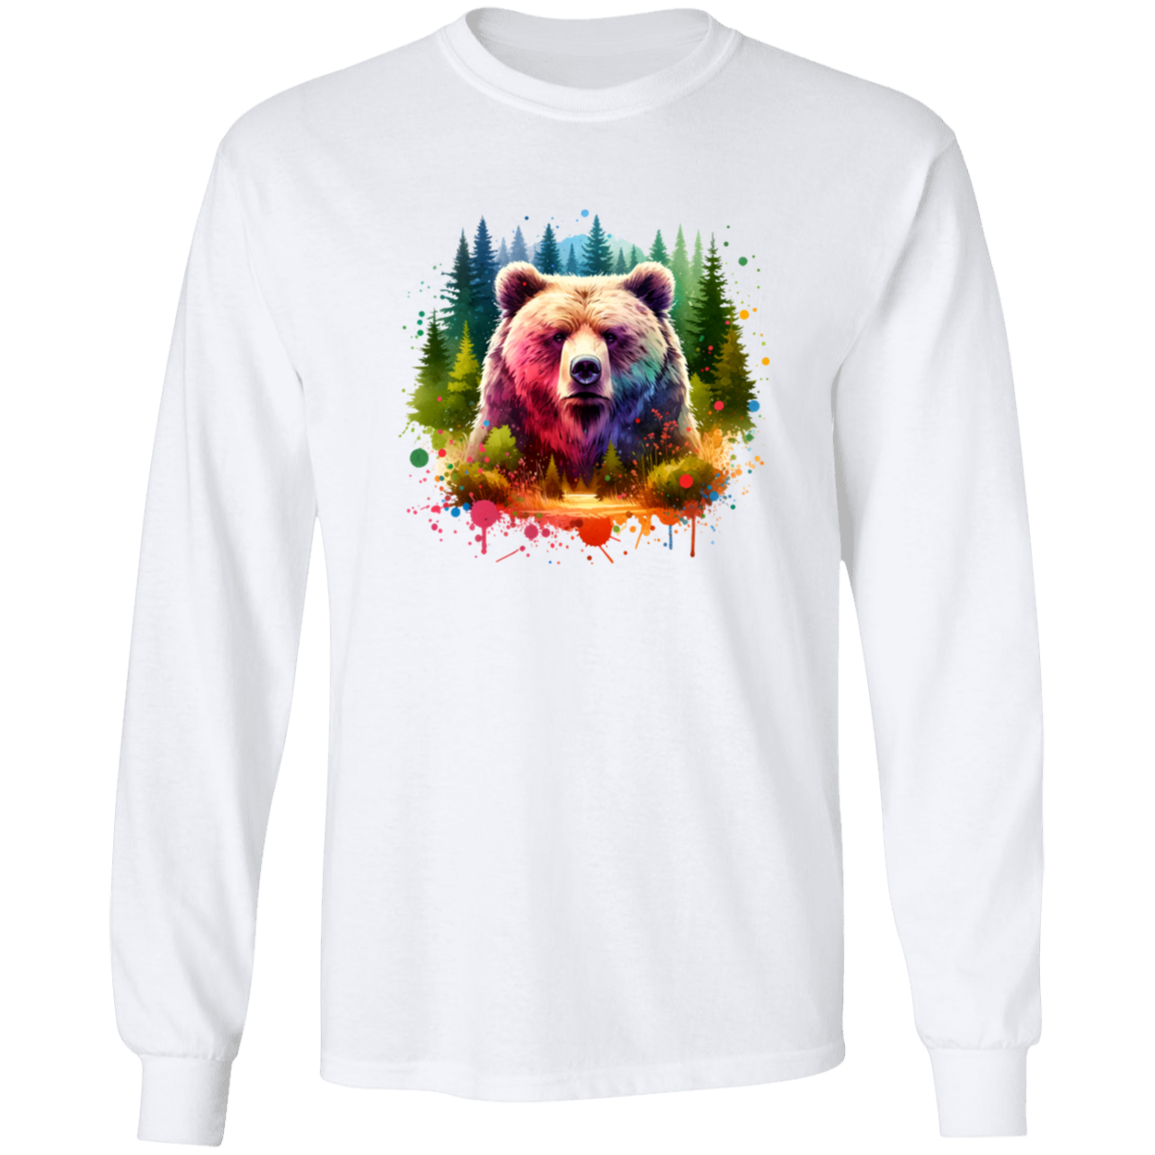 Grizzly Bear Portrait - T-shirts, Hoodies and Sweatshirts